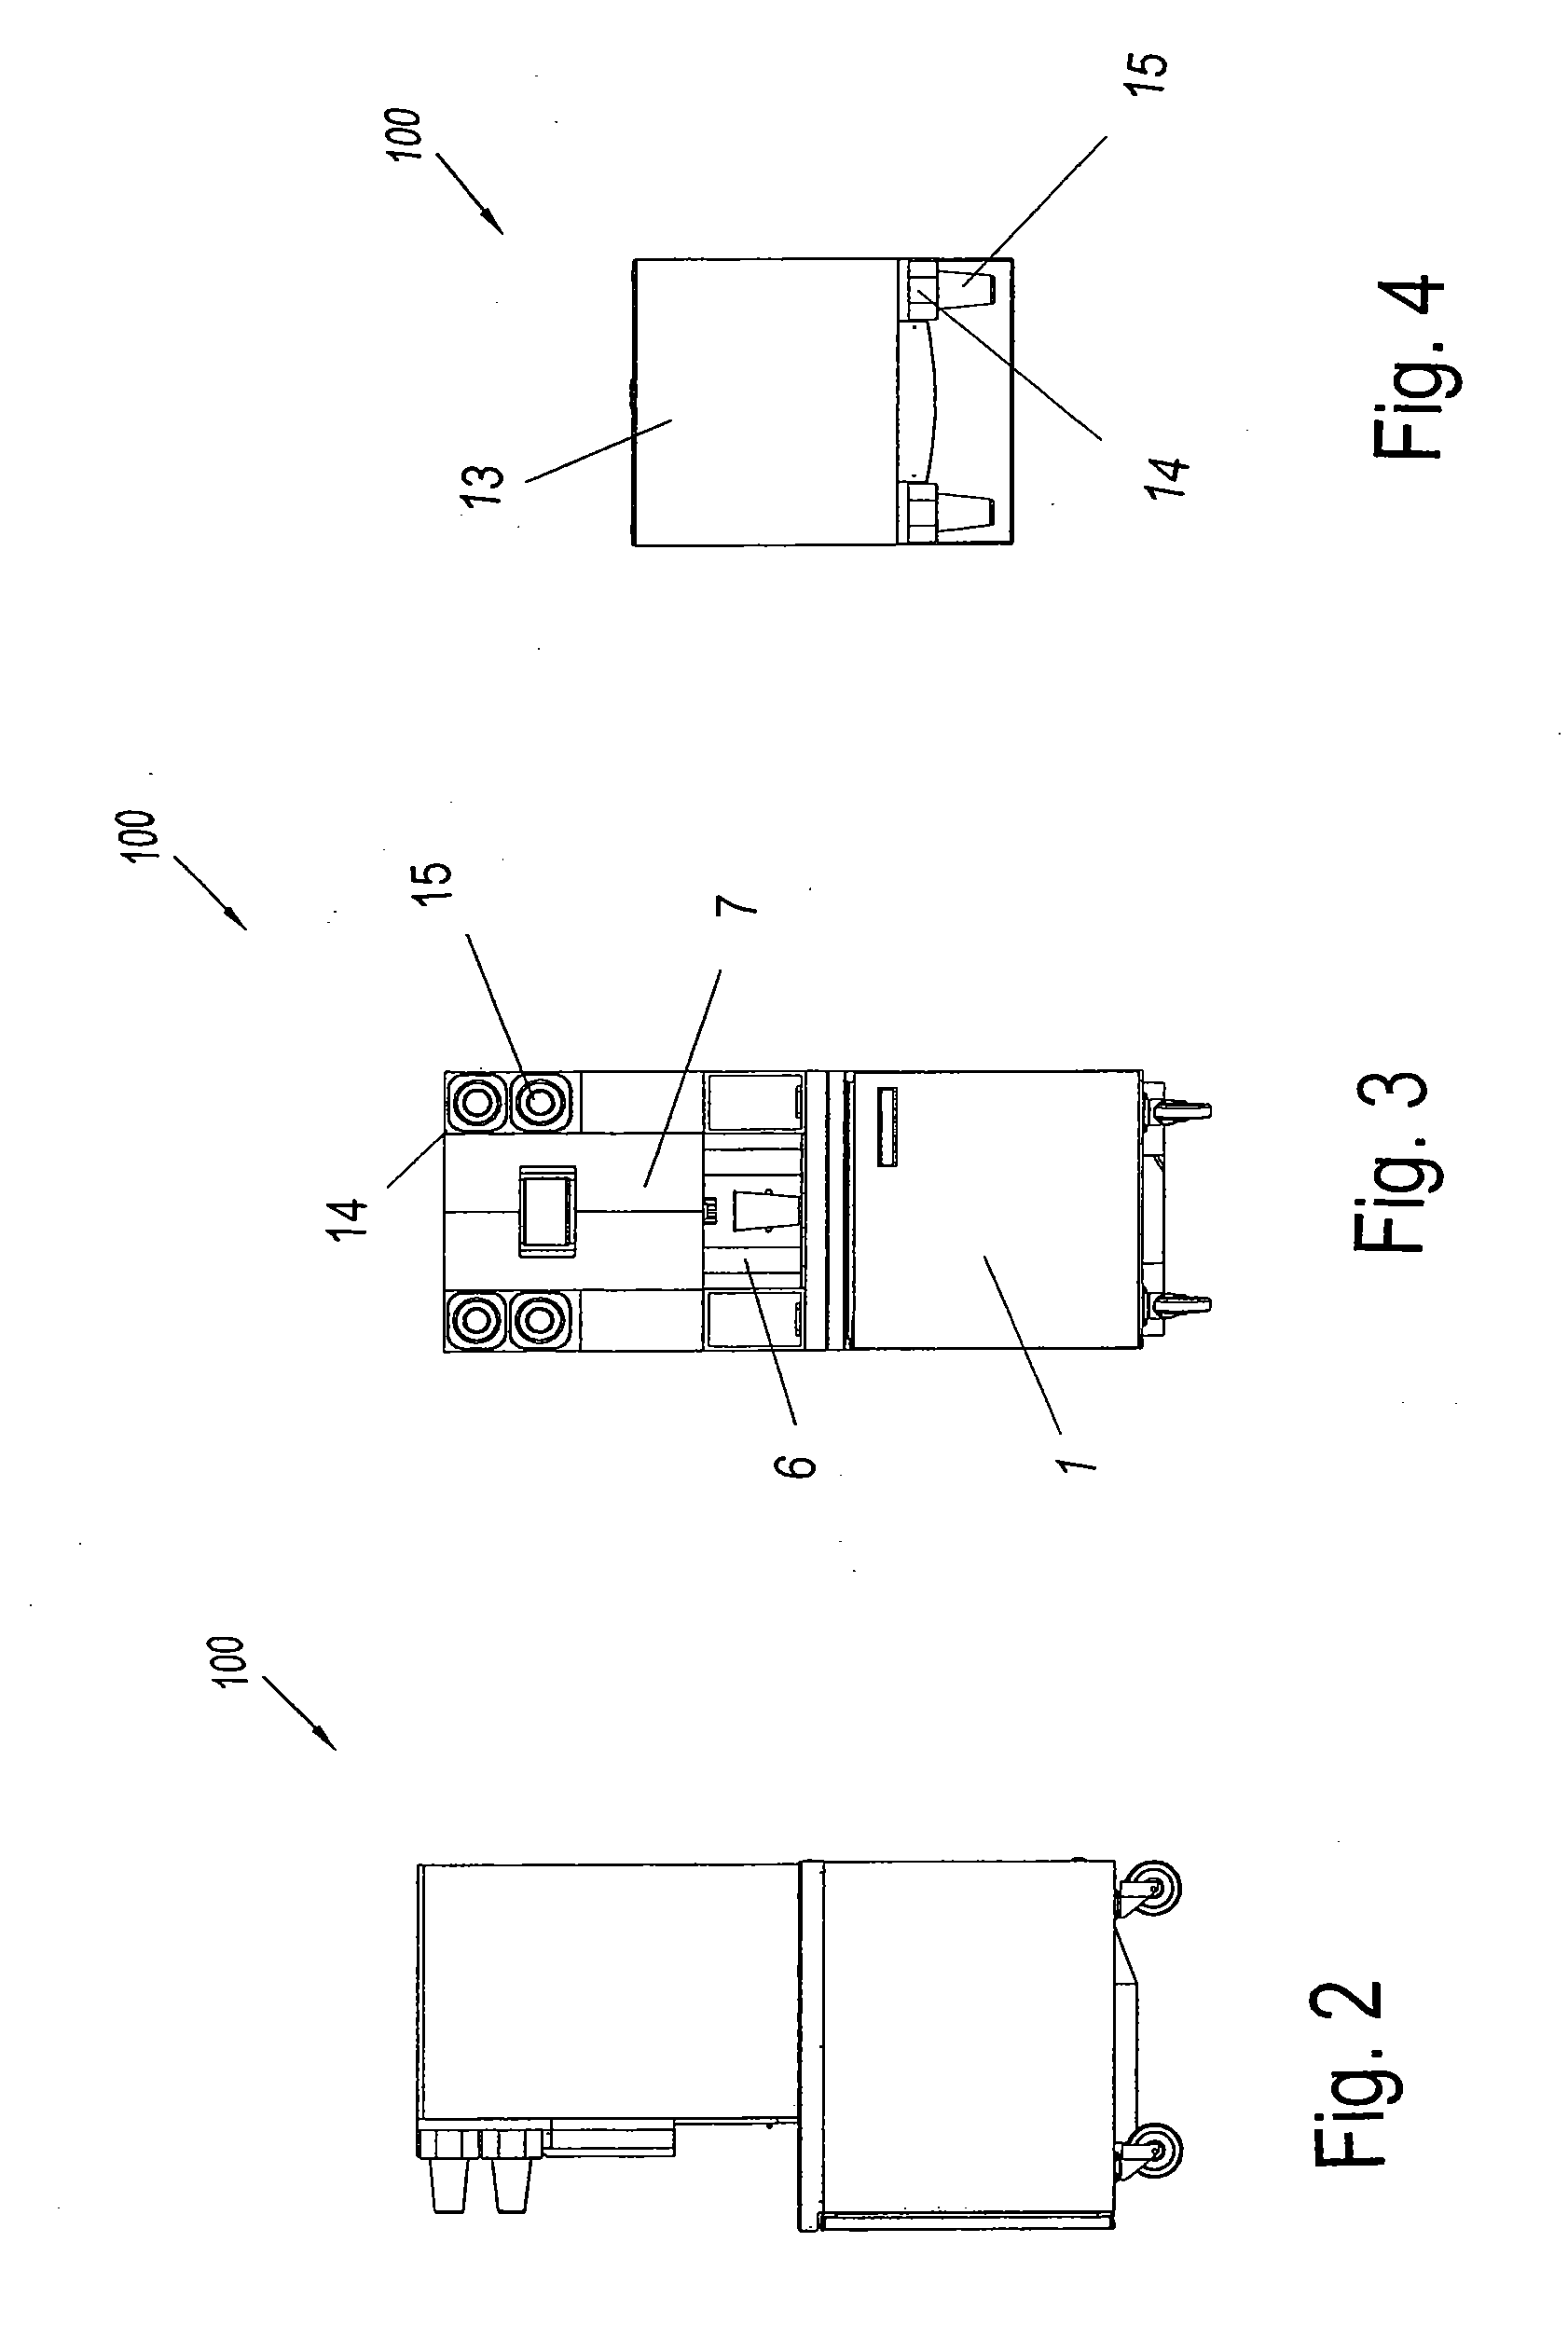 Integrated method and system for dispensing and blending/mixing beverage ingredients